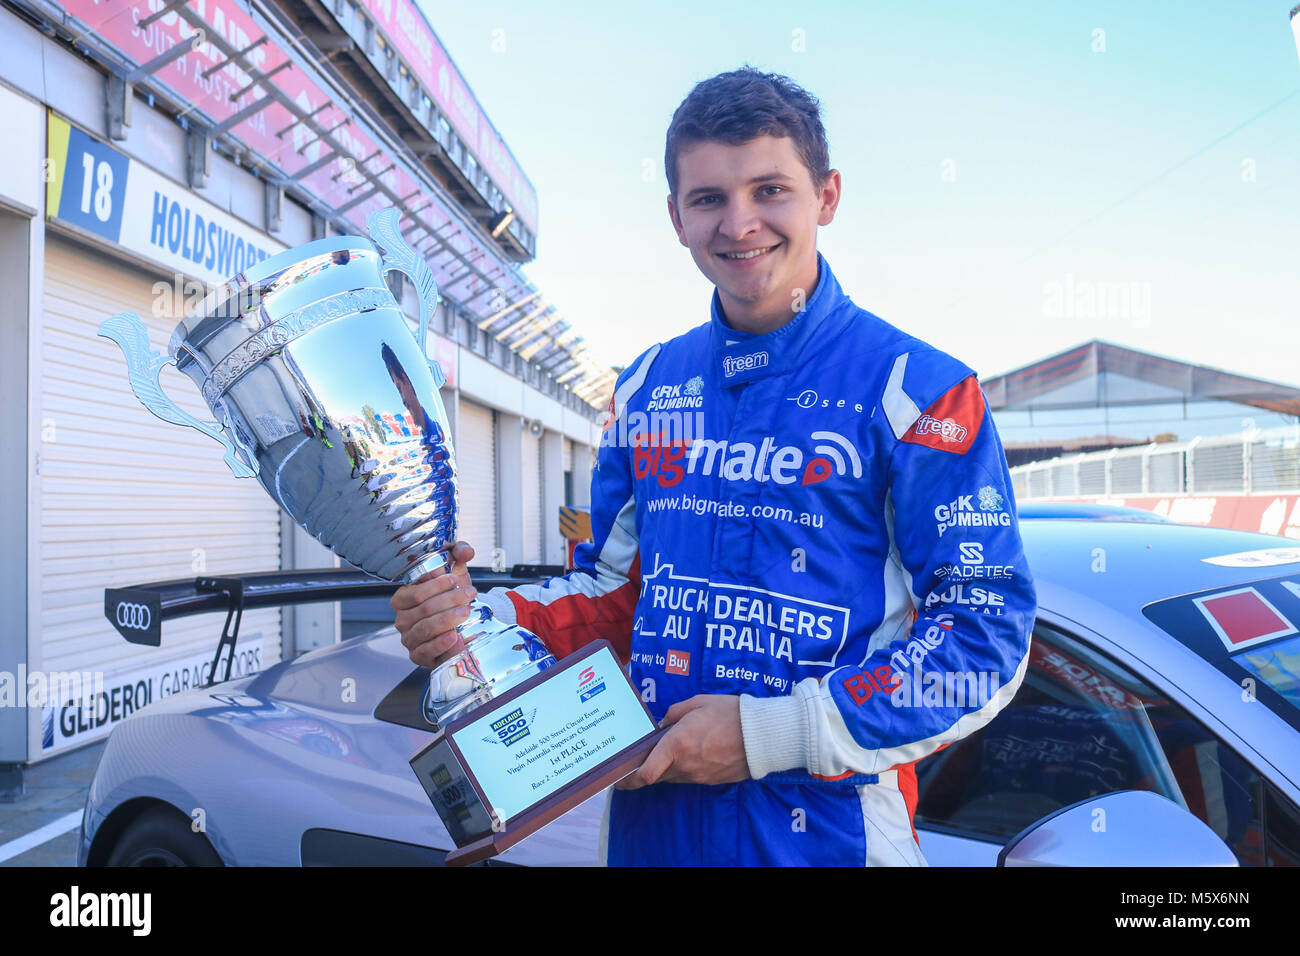 Adelaide, Australia. 27th Feb, 2018. 22 year old rookie Supercar racing driver Todd Hazelwood who will compete in   the 2018 Virgin Australia Supercars Championship with Matt Stone Racing in the No. 35 Ford FG X Falcon unveils the new trophy at trackside for the 20th anniversary of the Adelaide 500  which  is expected to draw large crowds for the four day motorsport racing event beginning March 1. Todd Hazlewood is Winner of the 2017 Dunlop Super2 Series Credit: amer ghazzal/Alamy Live News Stock Photo